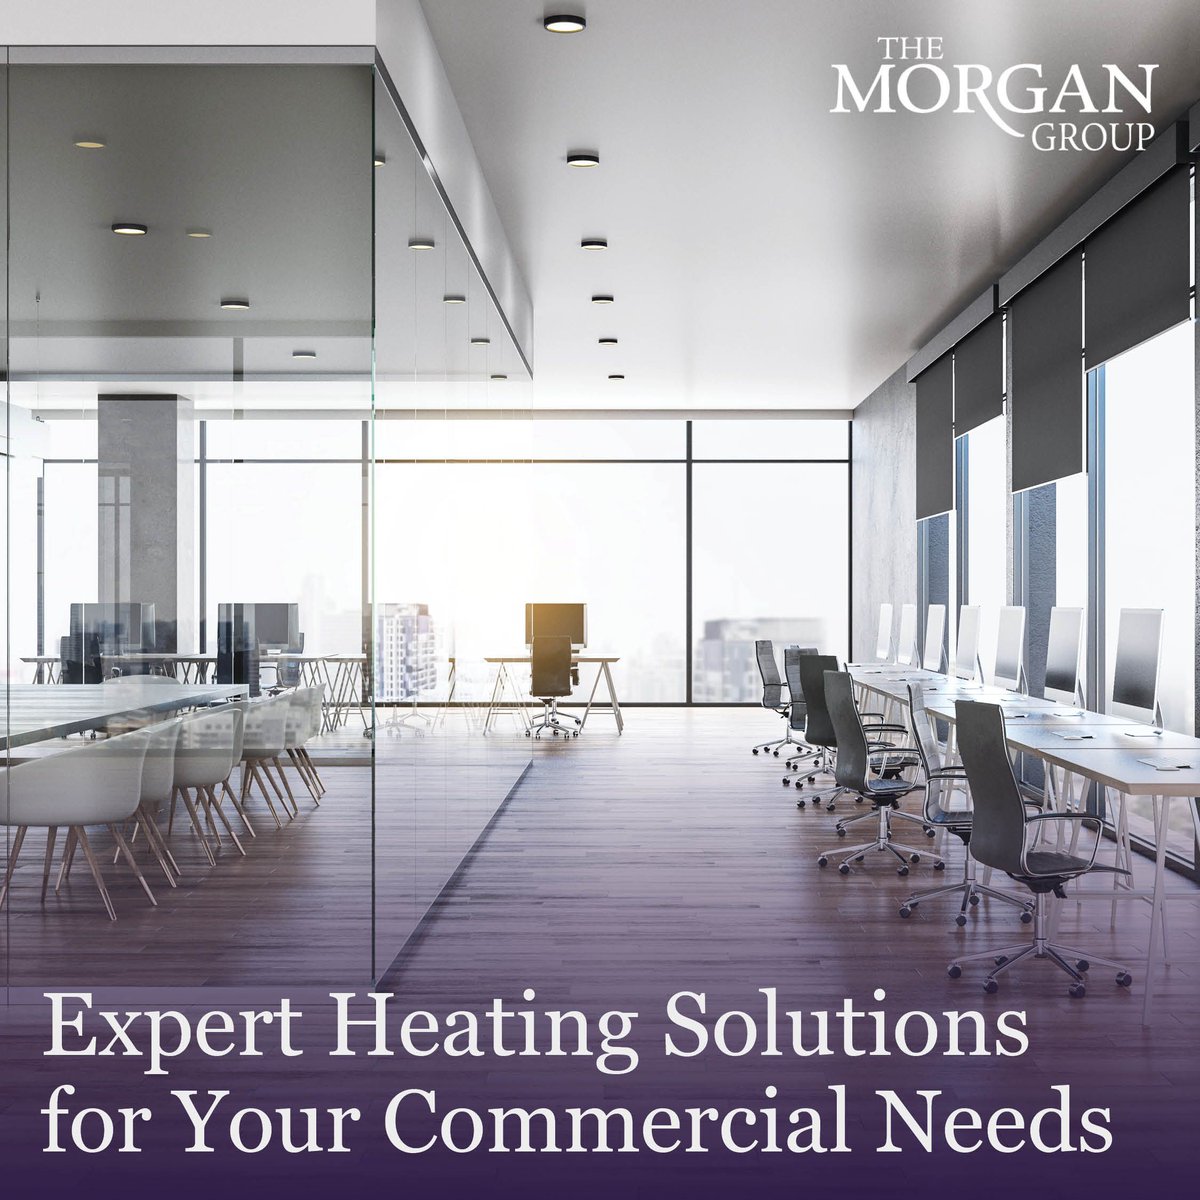 Keep your business space warm with TMG's commercial heating services.

Our expert team offers installation, repair, and maintenance for all types of commercial heating systems.

Visit our website to learn more: themorgangroup.ca/services/ #CommercialHeating #HeatingServices #TMG